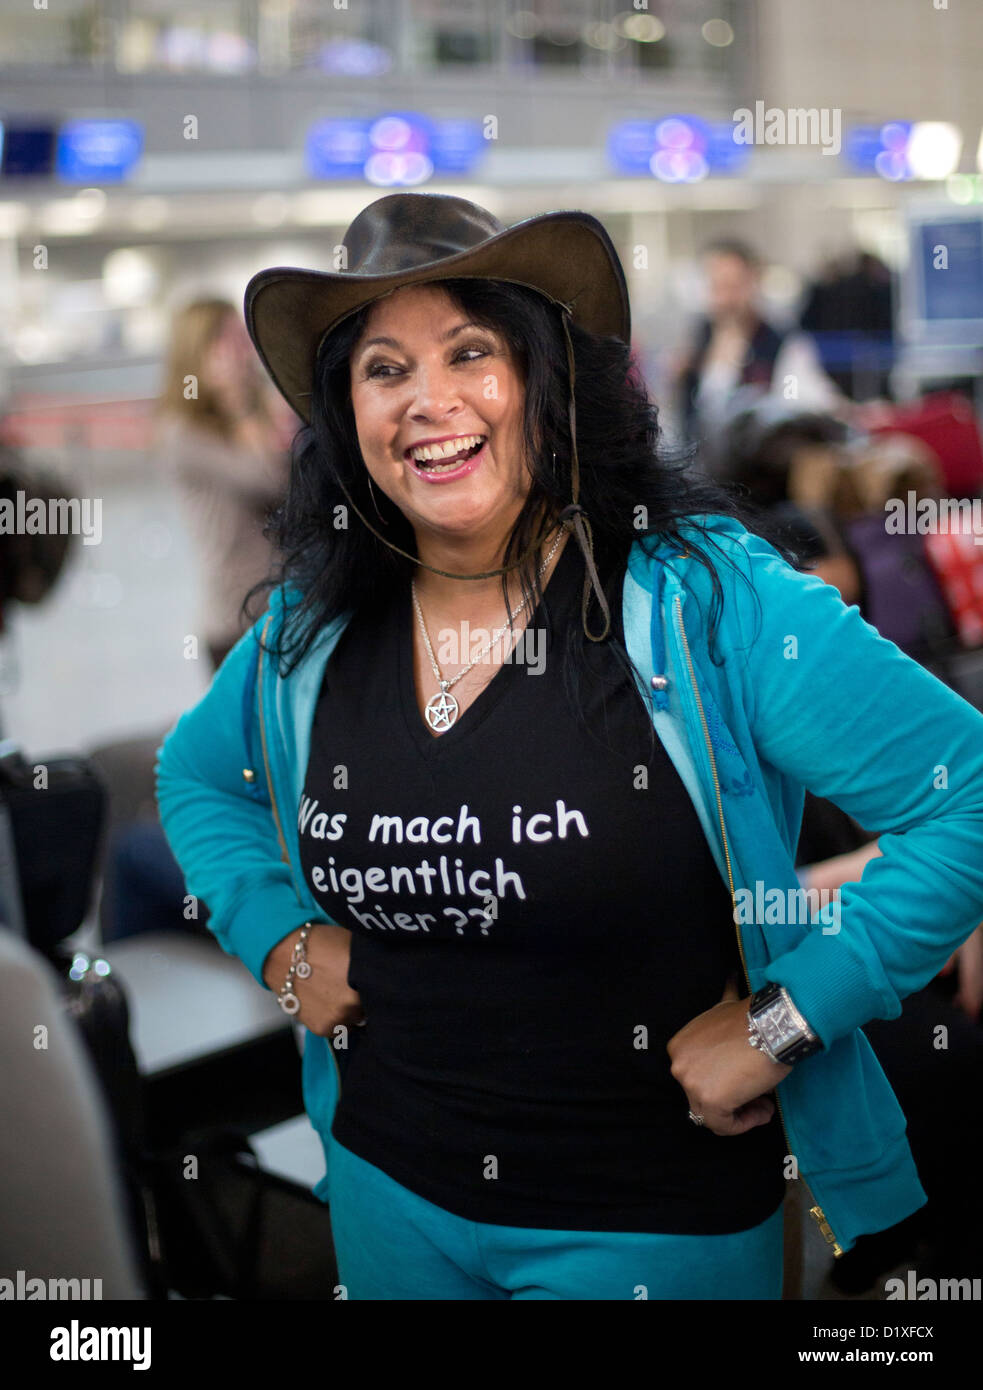 Iris Klein, mother of Daniela Katzenberger, poses for photographs at the airport in Frankfurt am Main, Germany, 06 January 2013. They leave for the Australian jungle camp of the German reality television show Ich bin ein Star   Holt mich hier raus! (I'm a Star - Get Me Out of Here!). Photo: Frank Rumpenhorst Stock Photo